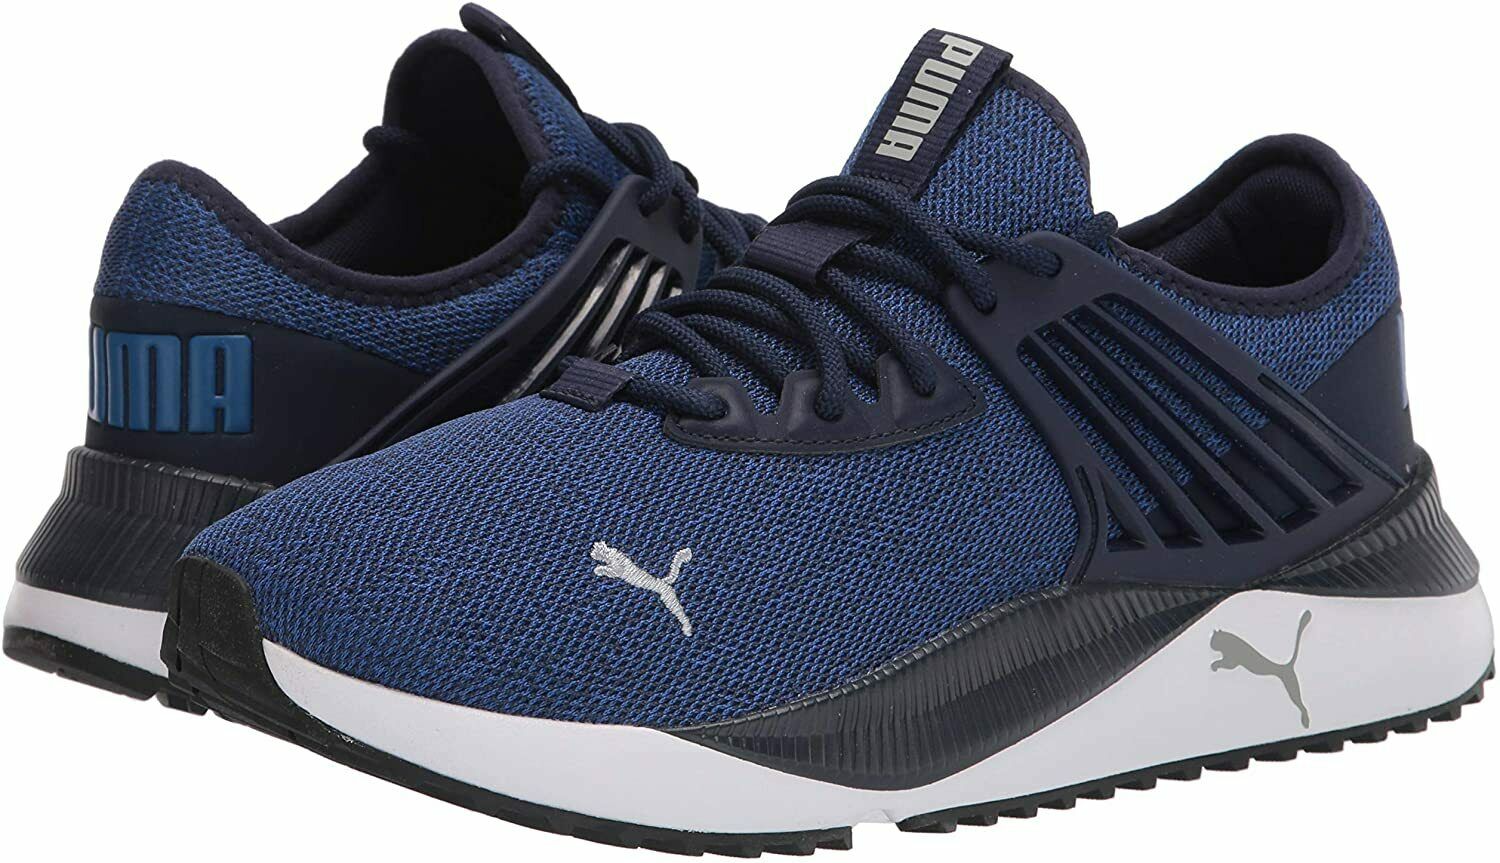 Puma Men's Pacer Future Knit Athletic Train Sneakers 38060301 - image 1 of 5